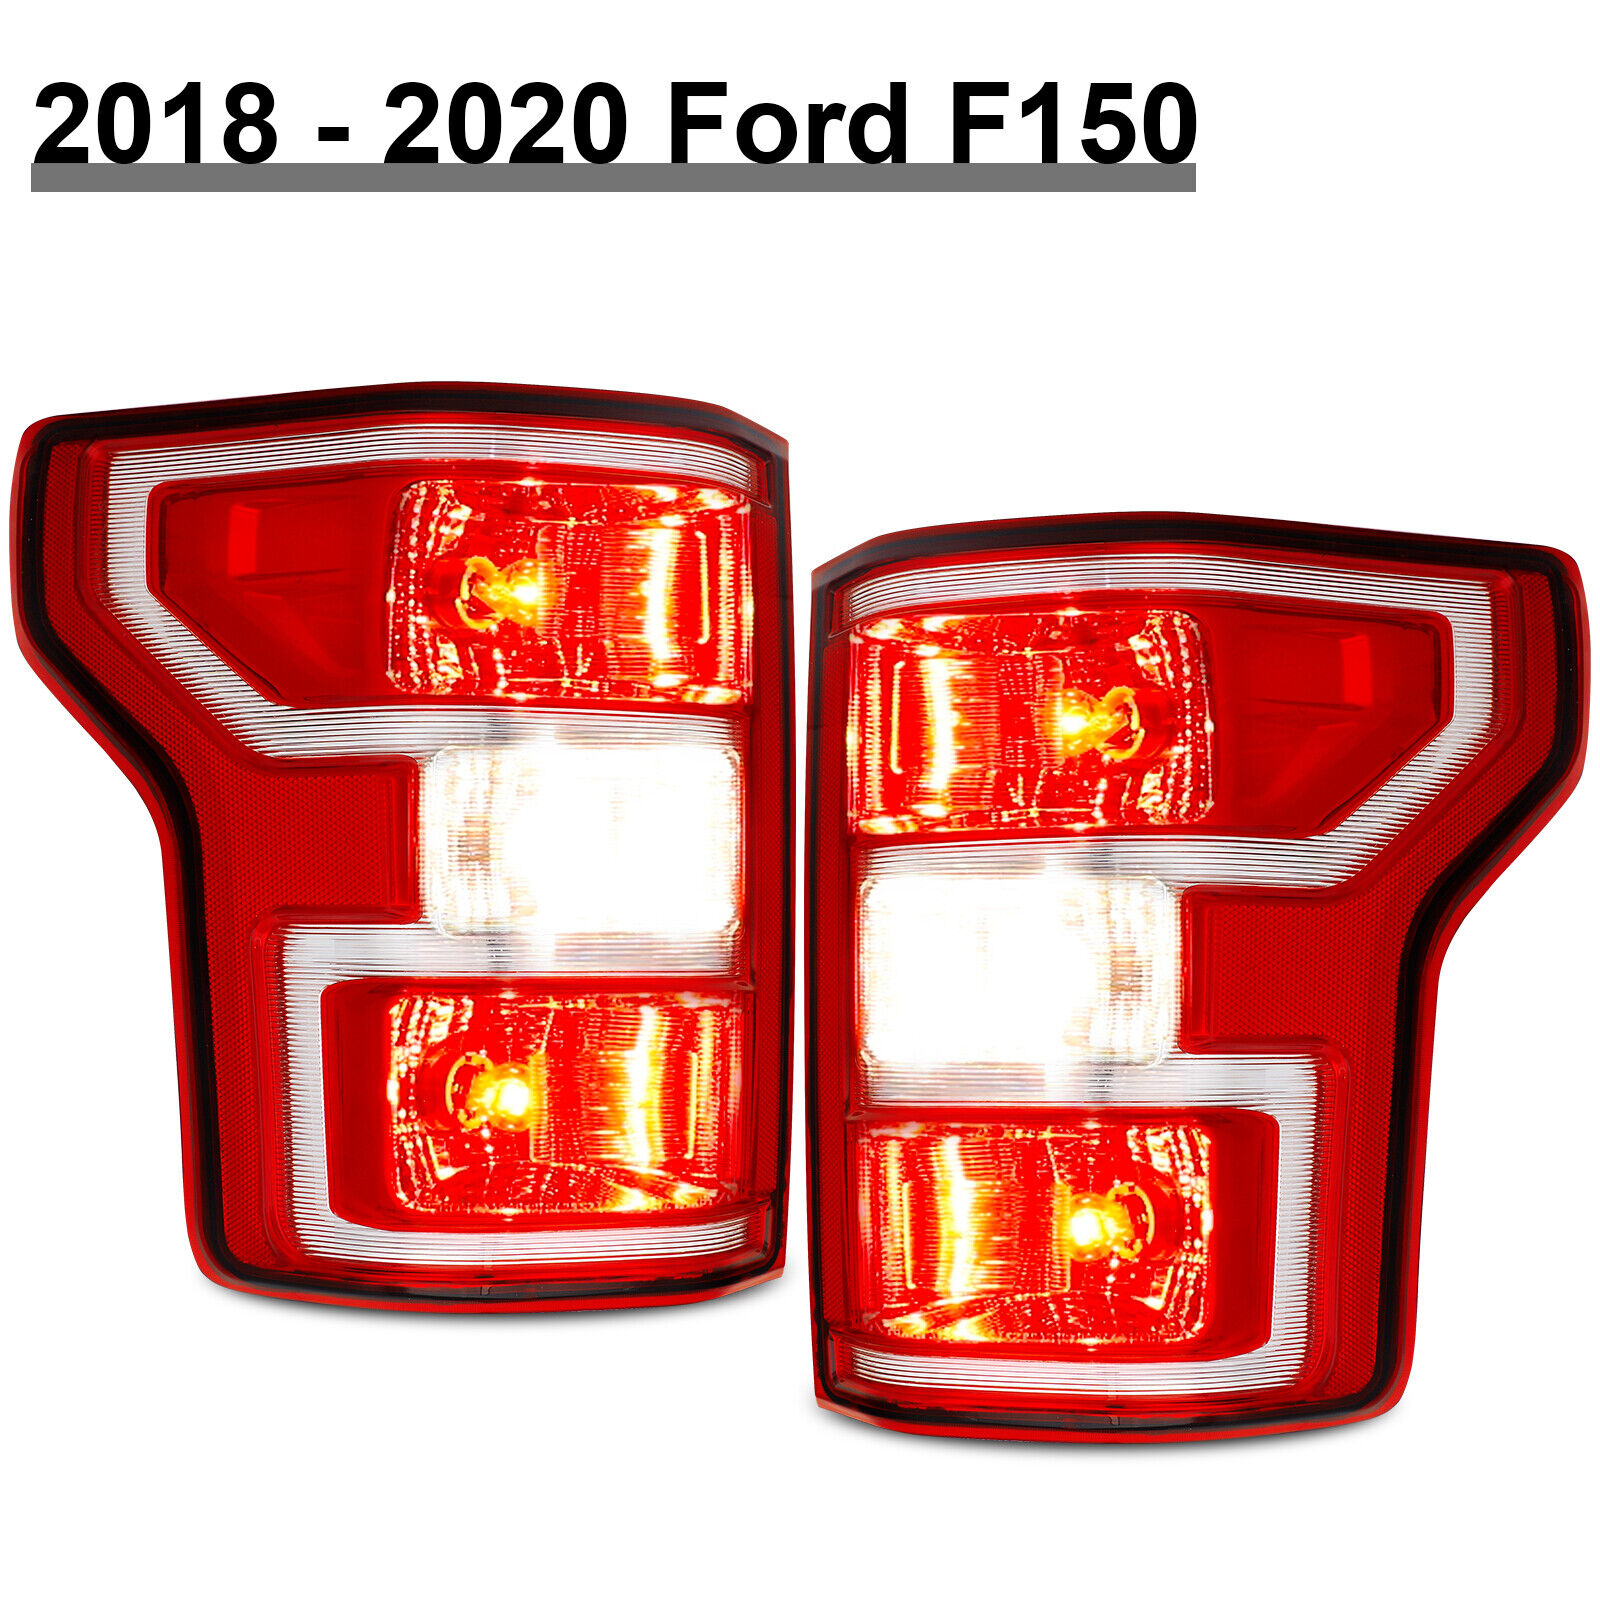 Pair Taillights For Ford F150 F-150 Pickup 2018 2019 2020 Brake Tail Lights 